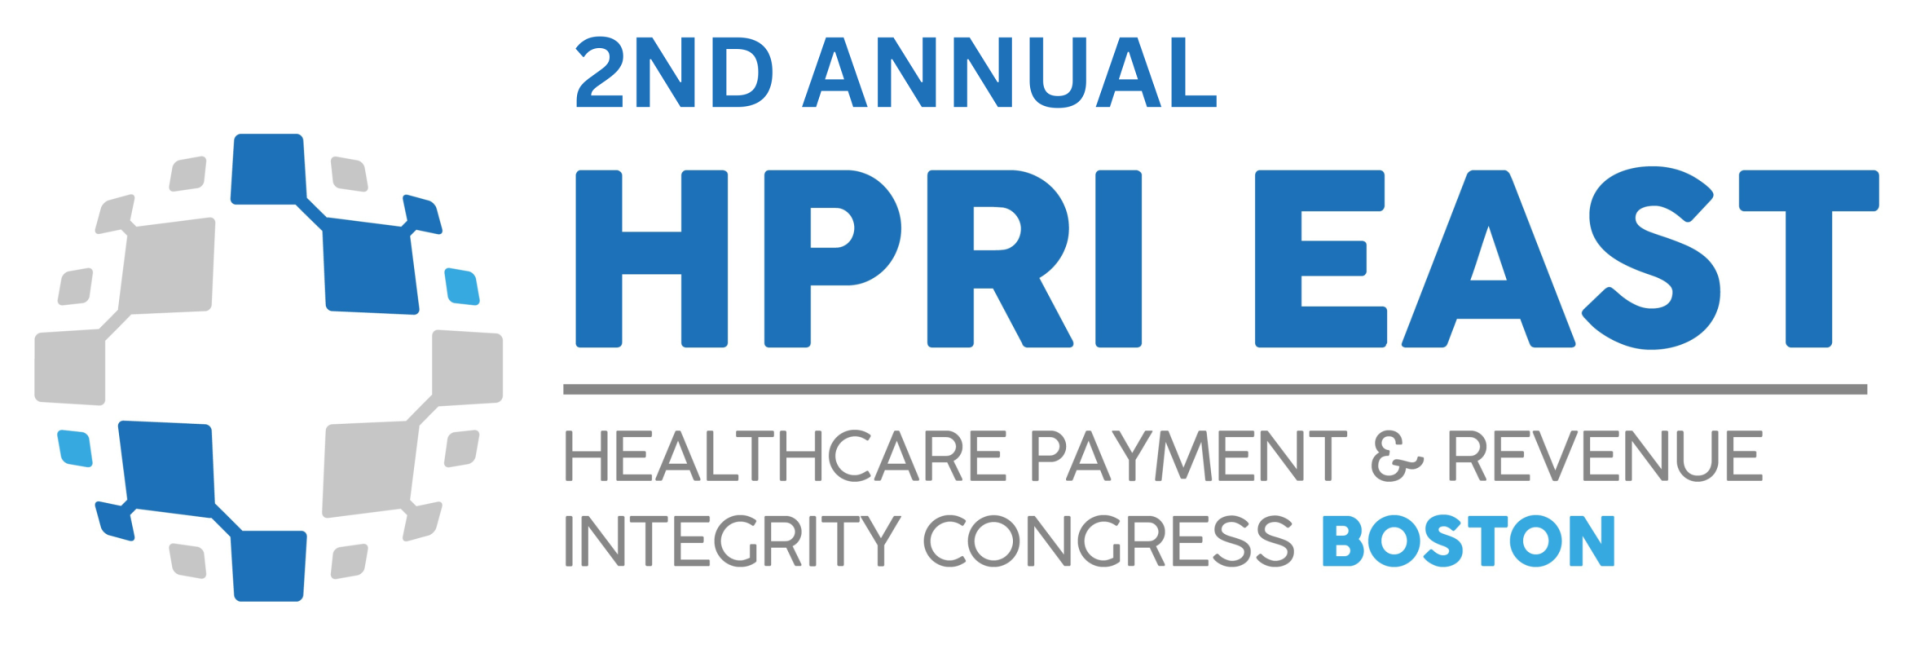 2nd Annual Healthcare Payment & Revenue Integrity East